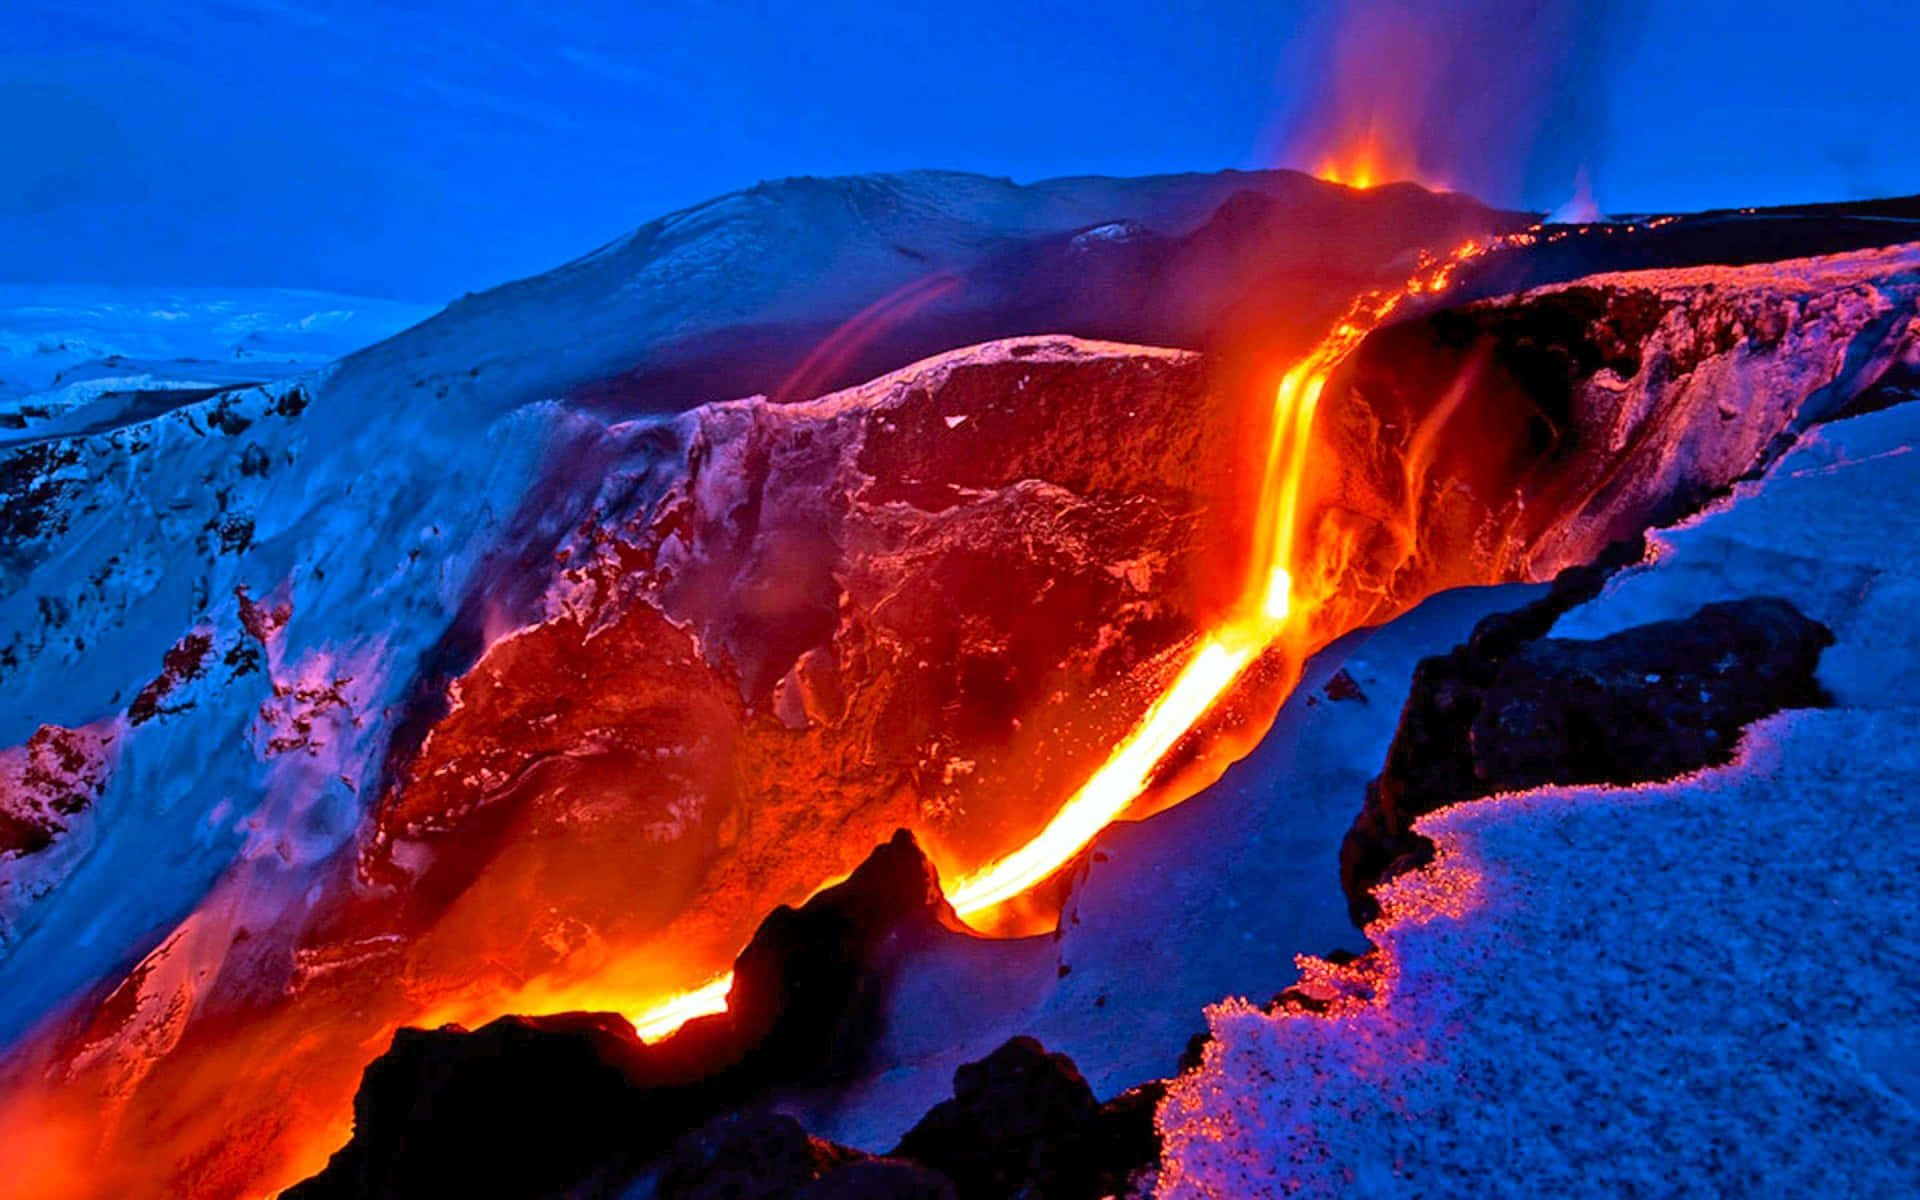 A Lava Flow Coming Out Of A Mountain